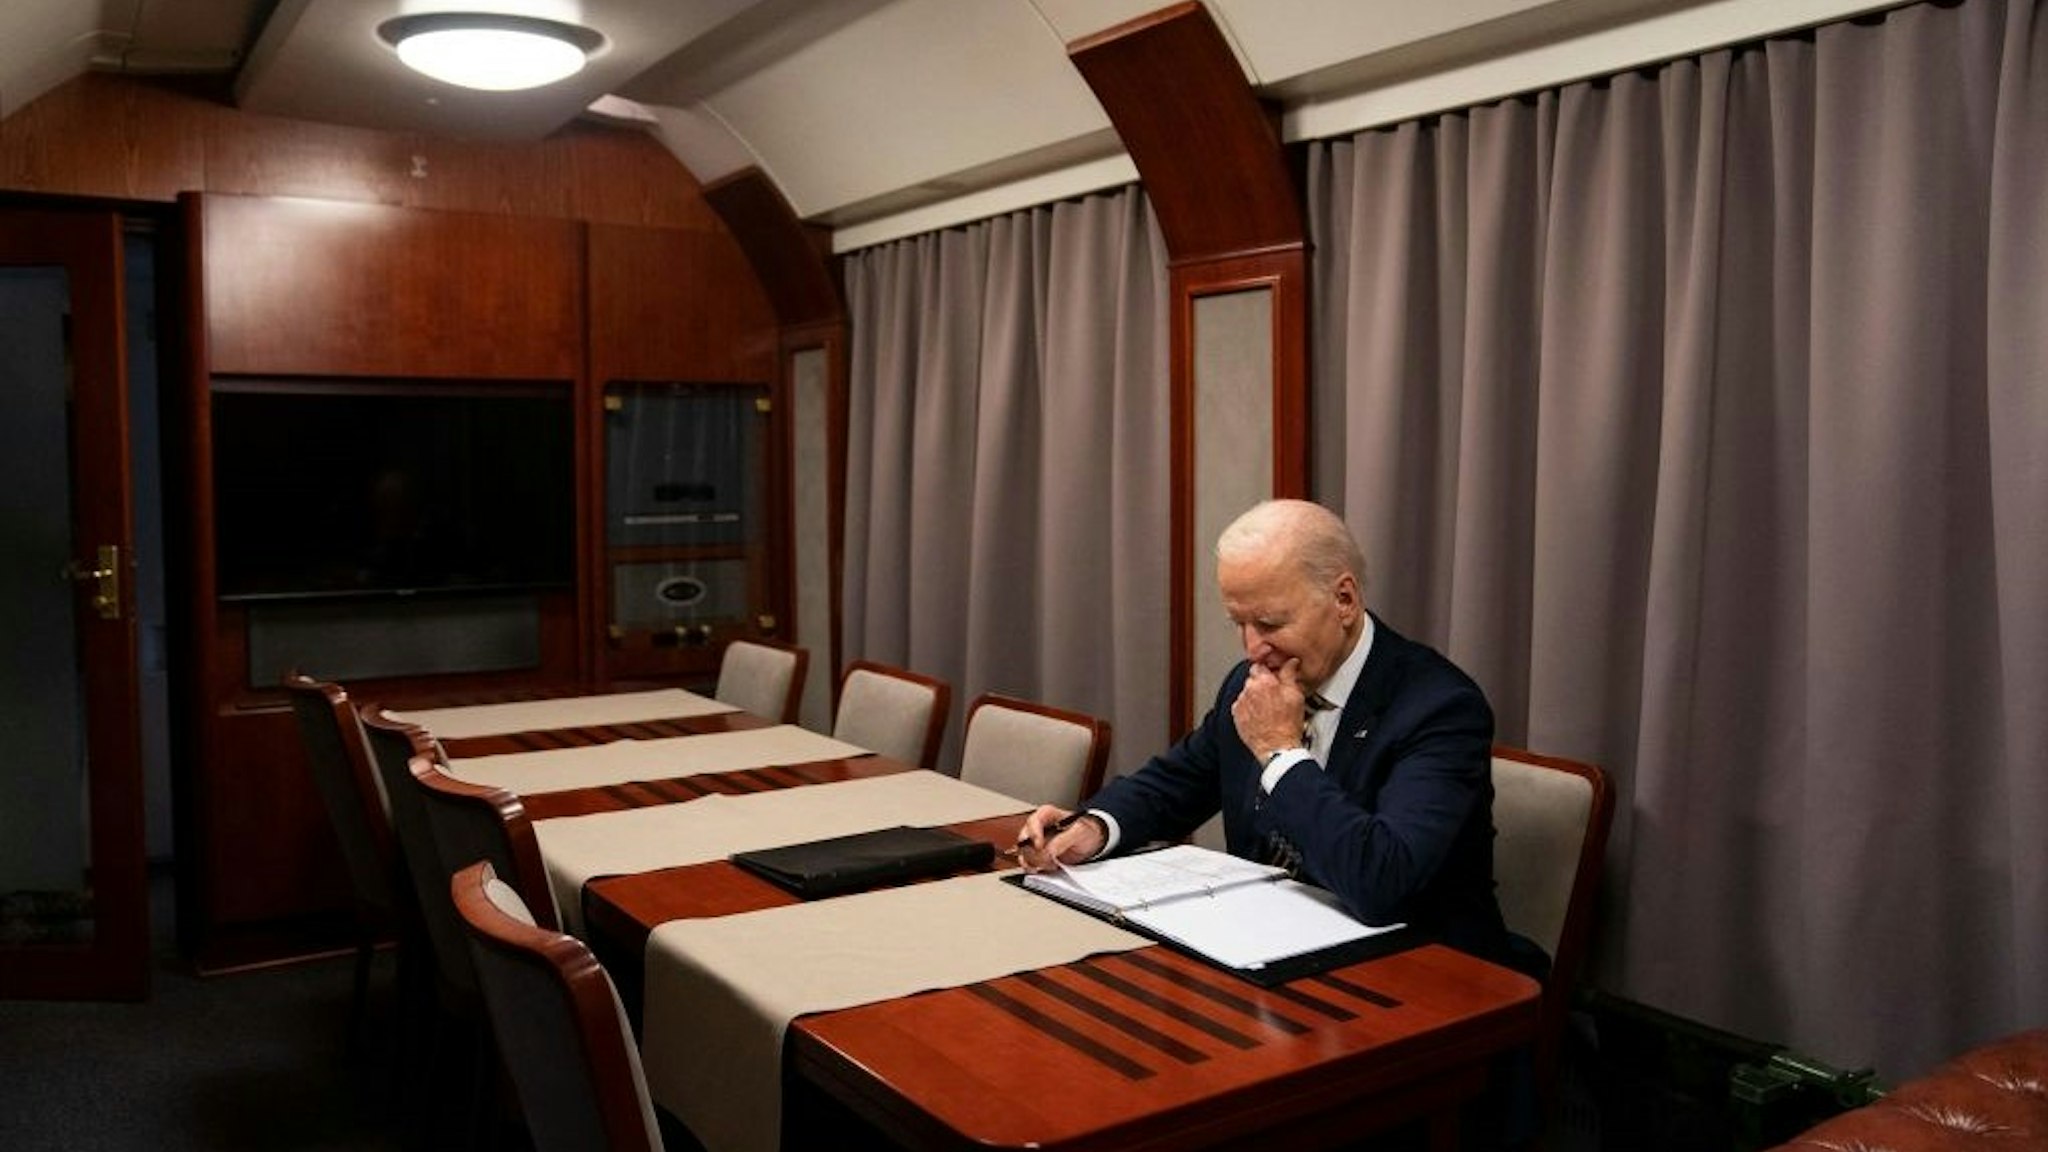 US President Joe Biden sits on a train as he goes over his speech marking the one-year anniversary of the war in Ukraine after a surprise visit to meet with Ukrainian President Volodymyr Zelenskyy, in Kyiv on February 20, 2023. (Photo by Evan Vucci / POOL / AFP) (Photo by